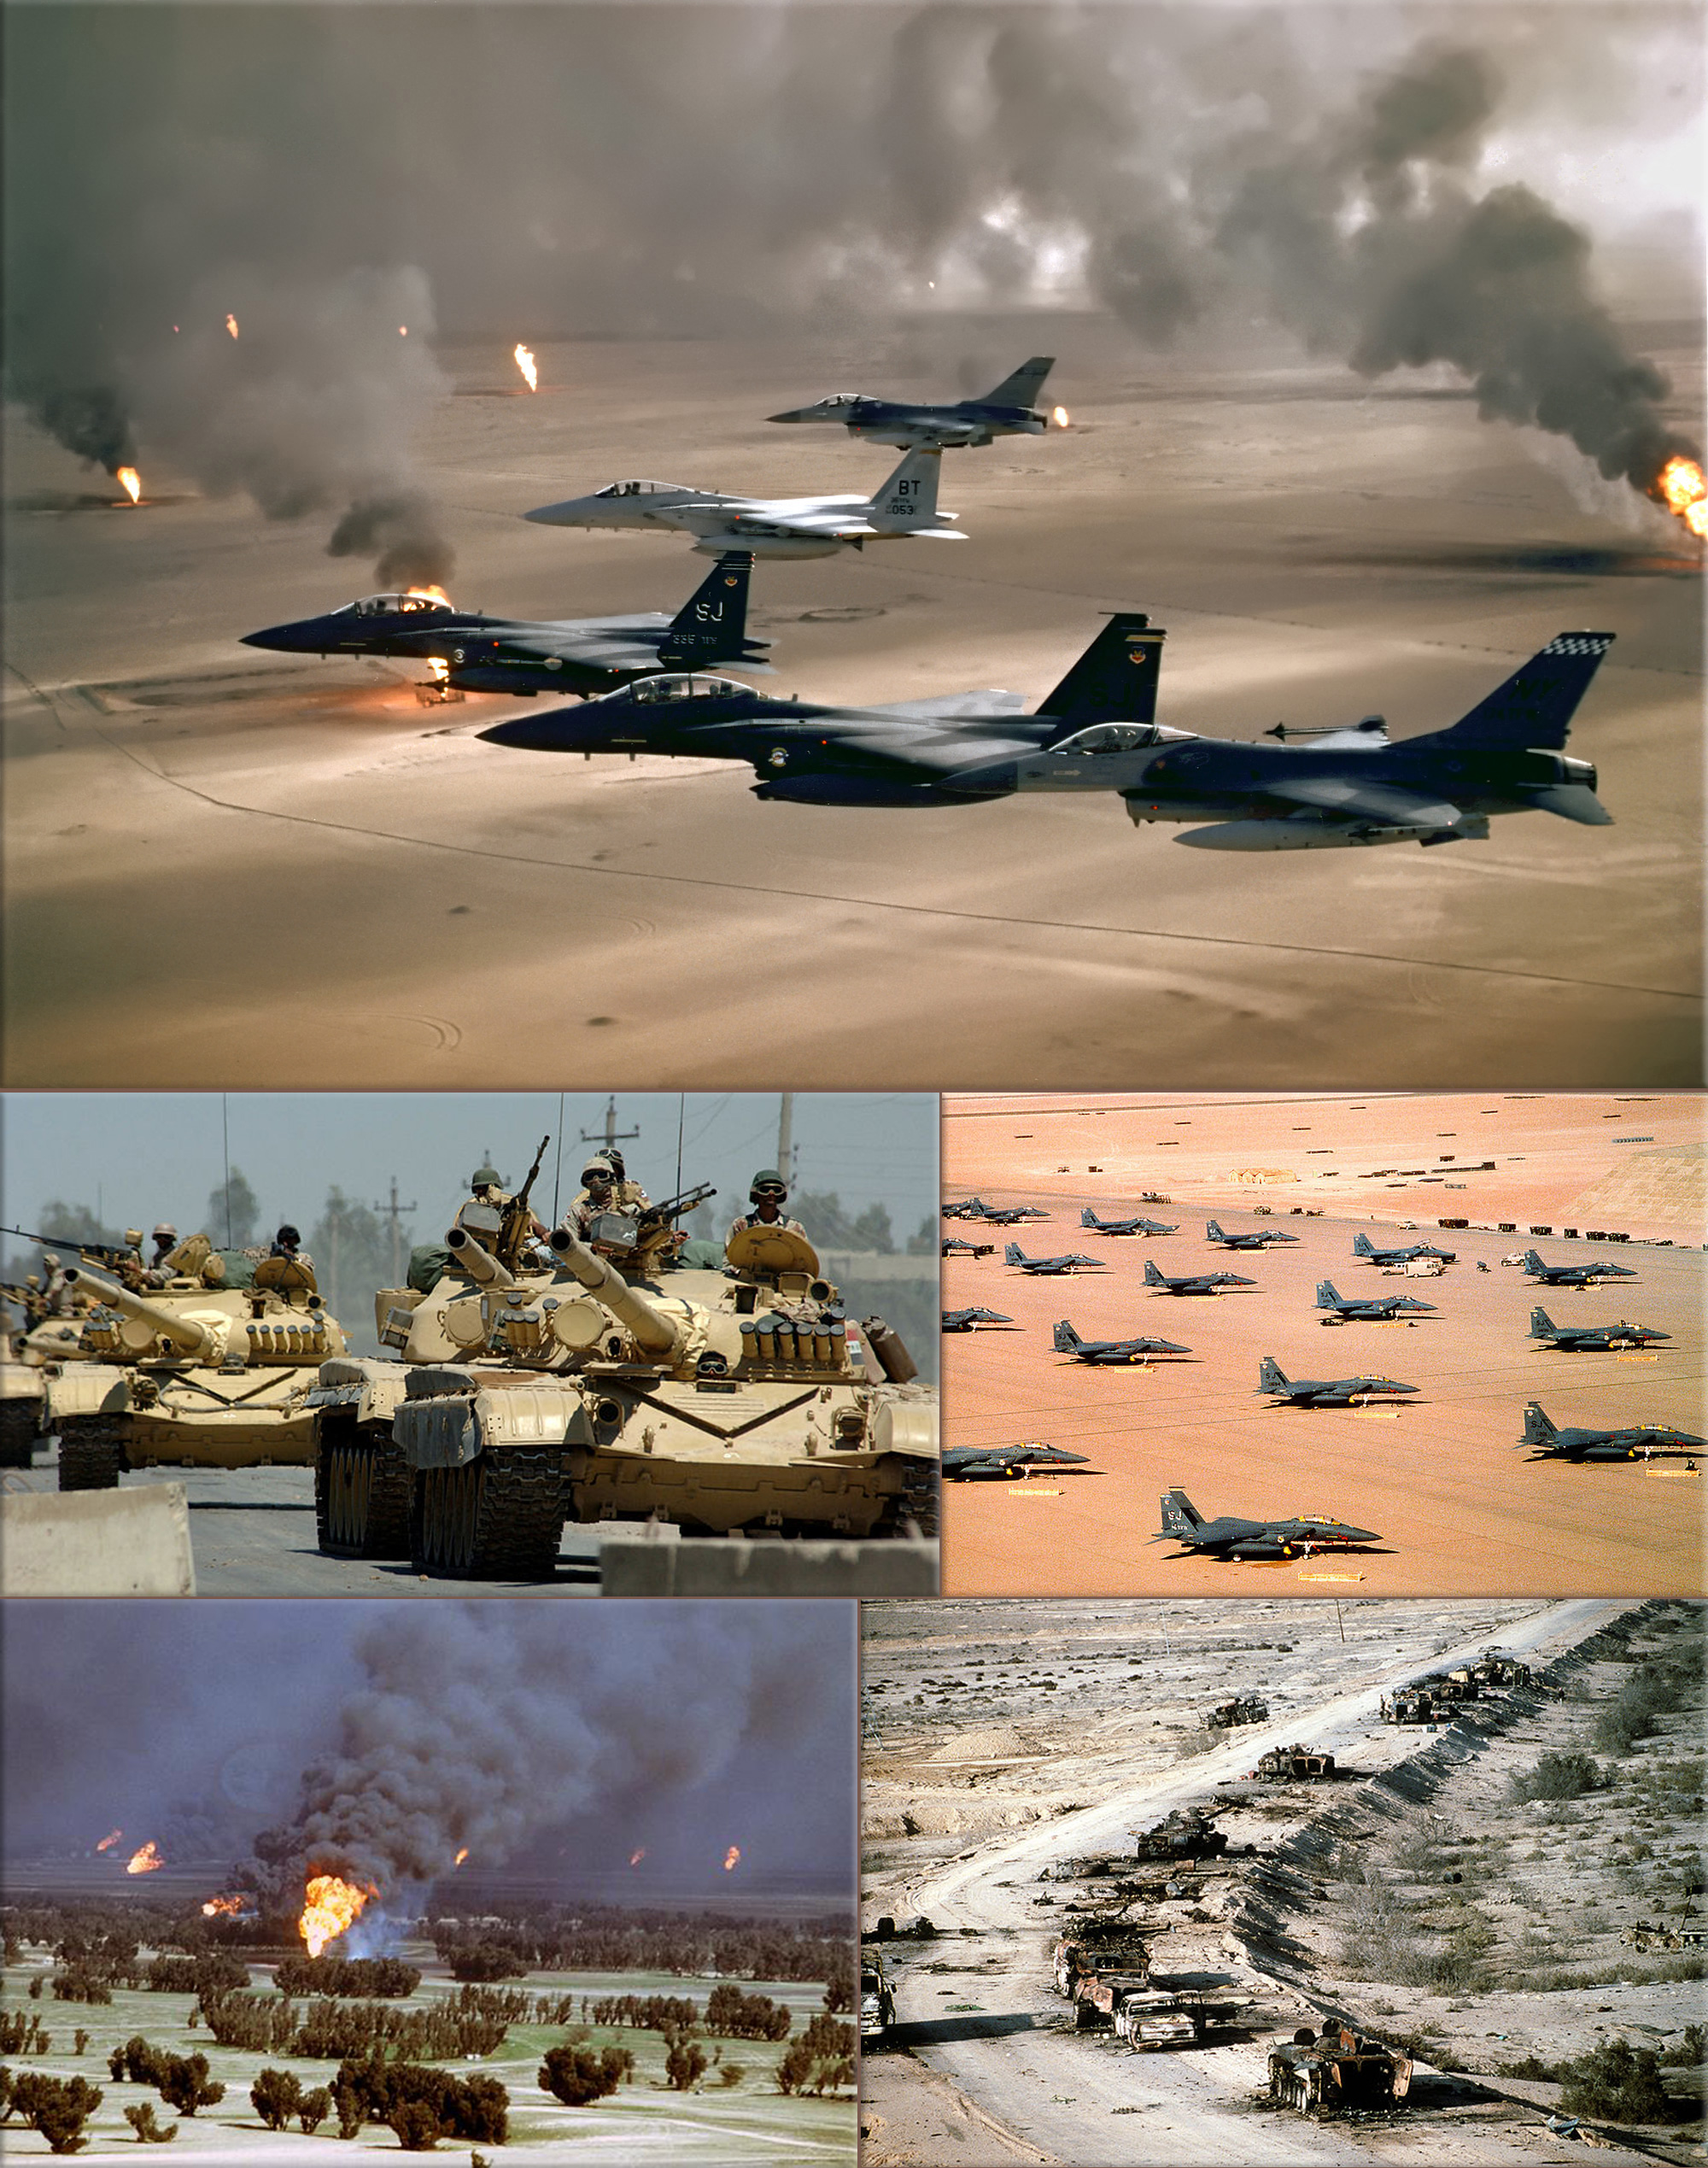 Iraq War: The Persian Gulf War (2 August 1990 – 28 February 1991), codenamed Operation Desert Storm (17 January 1991 – 28 February 1991) commonly referred to as simply the Gulf War, was a war waged by a UN-authorized coalition force from 34 nations led by the United States, against Iraq in response to Iraq's invasion and annexation of Kuwait